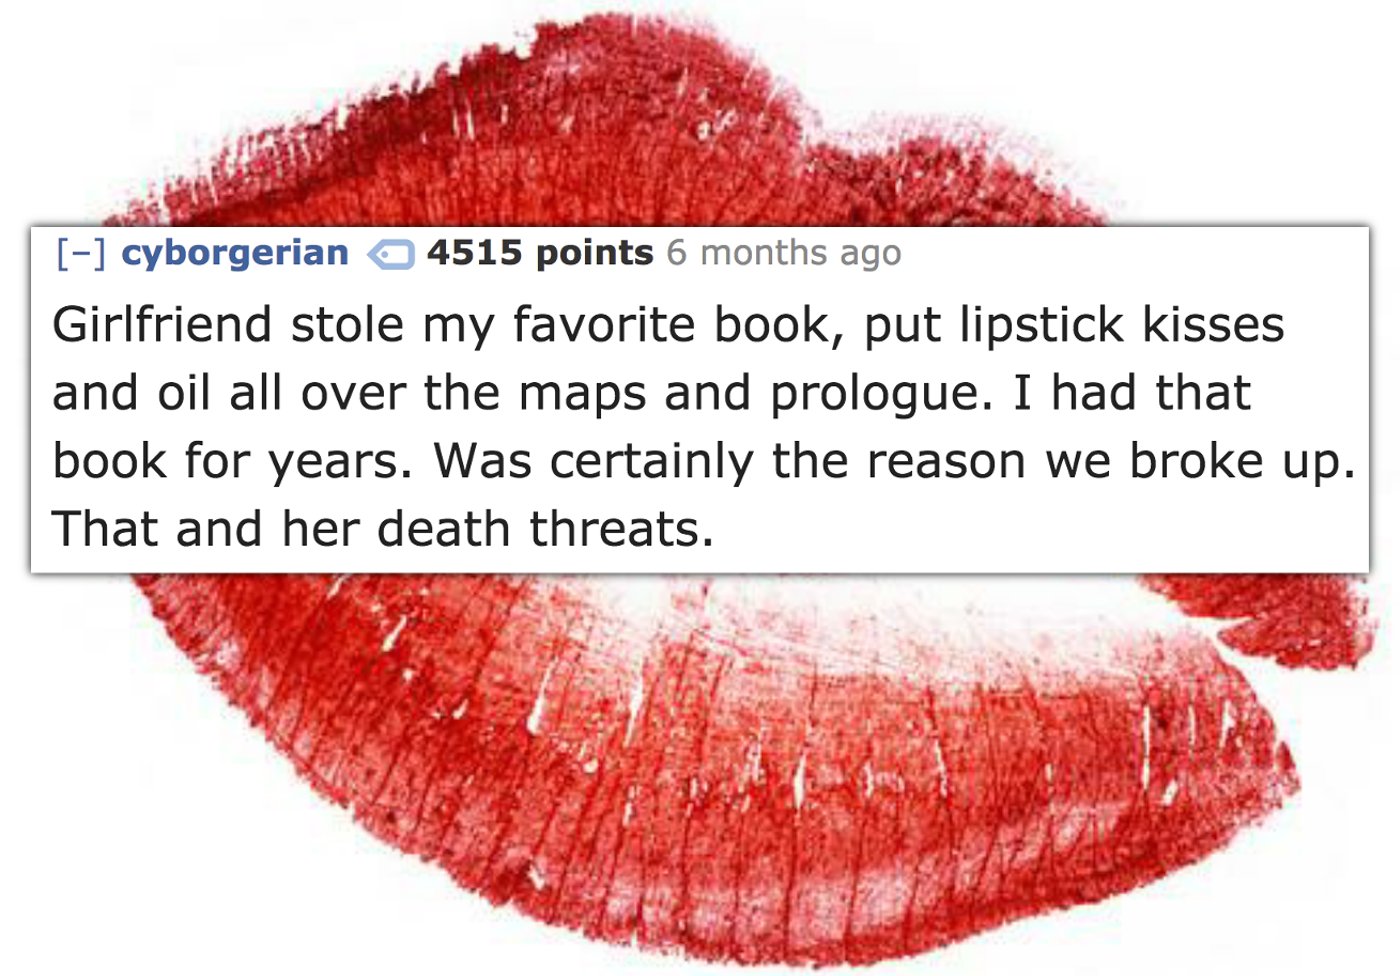 red lipstick stain - cyborgerian 4515 points 6 months ago Girlfriend stole my favorite book, put lipstick kisses and oil all over the maps and prologue. I had that | book for years. Was certainly the reason we broke up. That and her death threats.